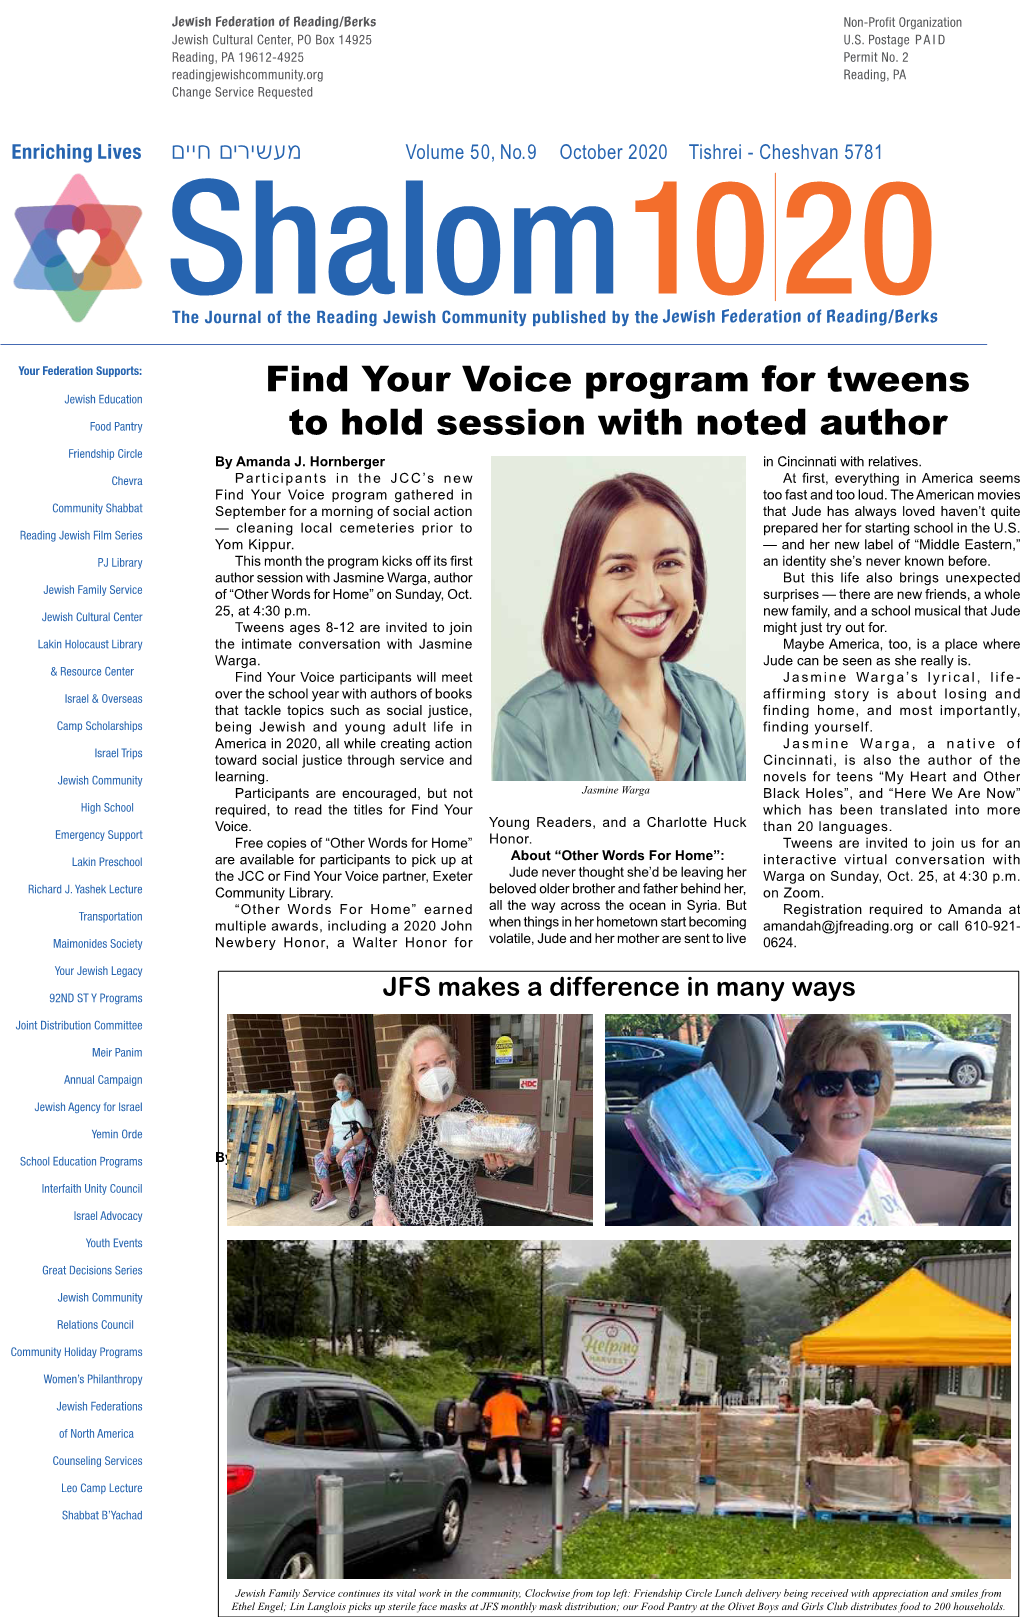 Find Your Voice Program for Tweens to Hold Session with Noted Author